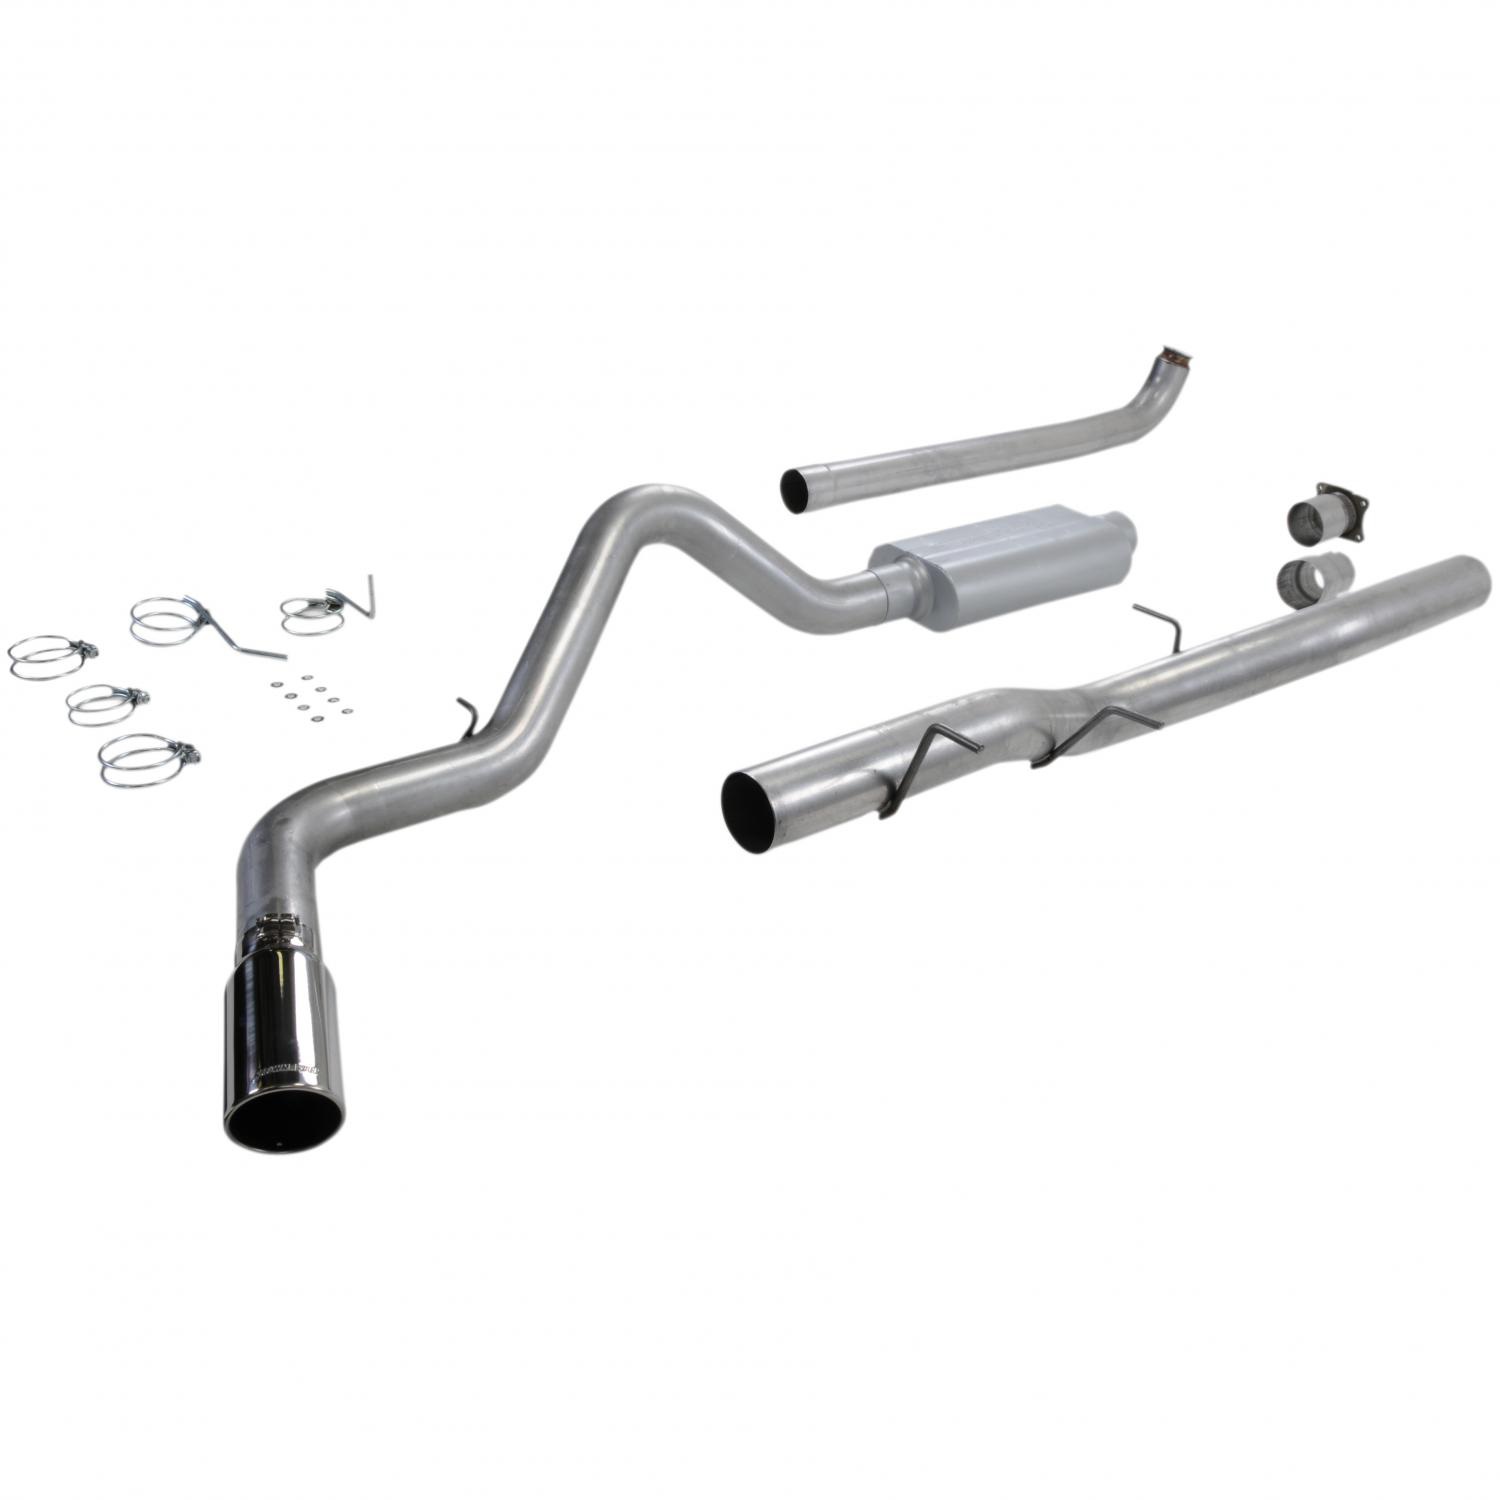 Flowmaster Flowmaster 17349 American Thunder Downpipe Back Exhaust System